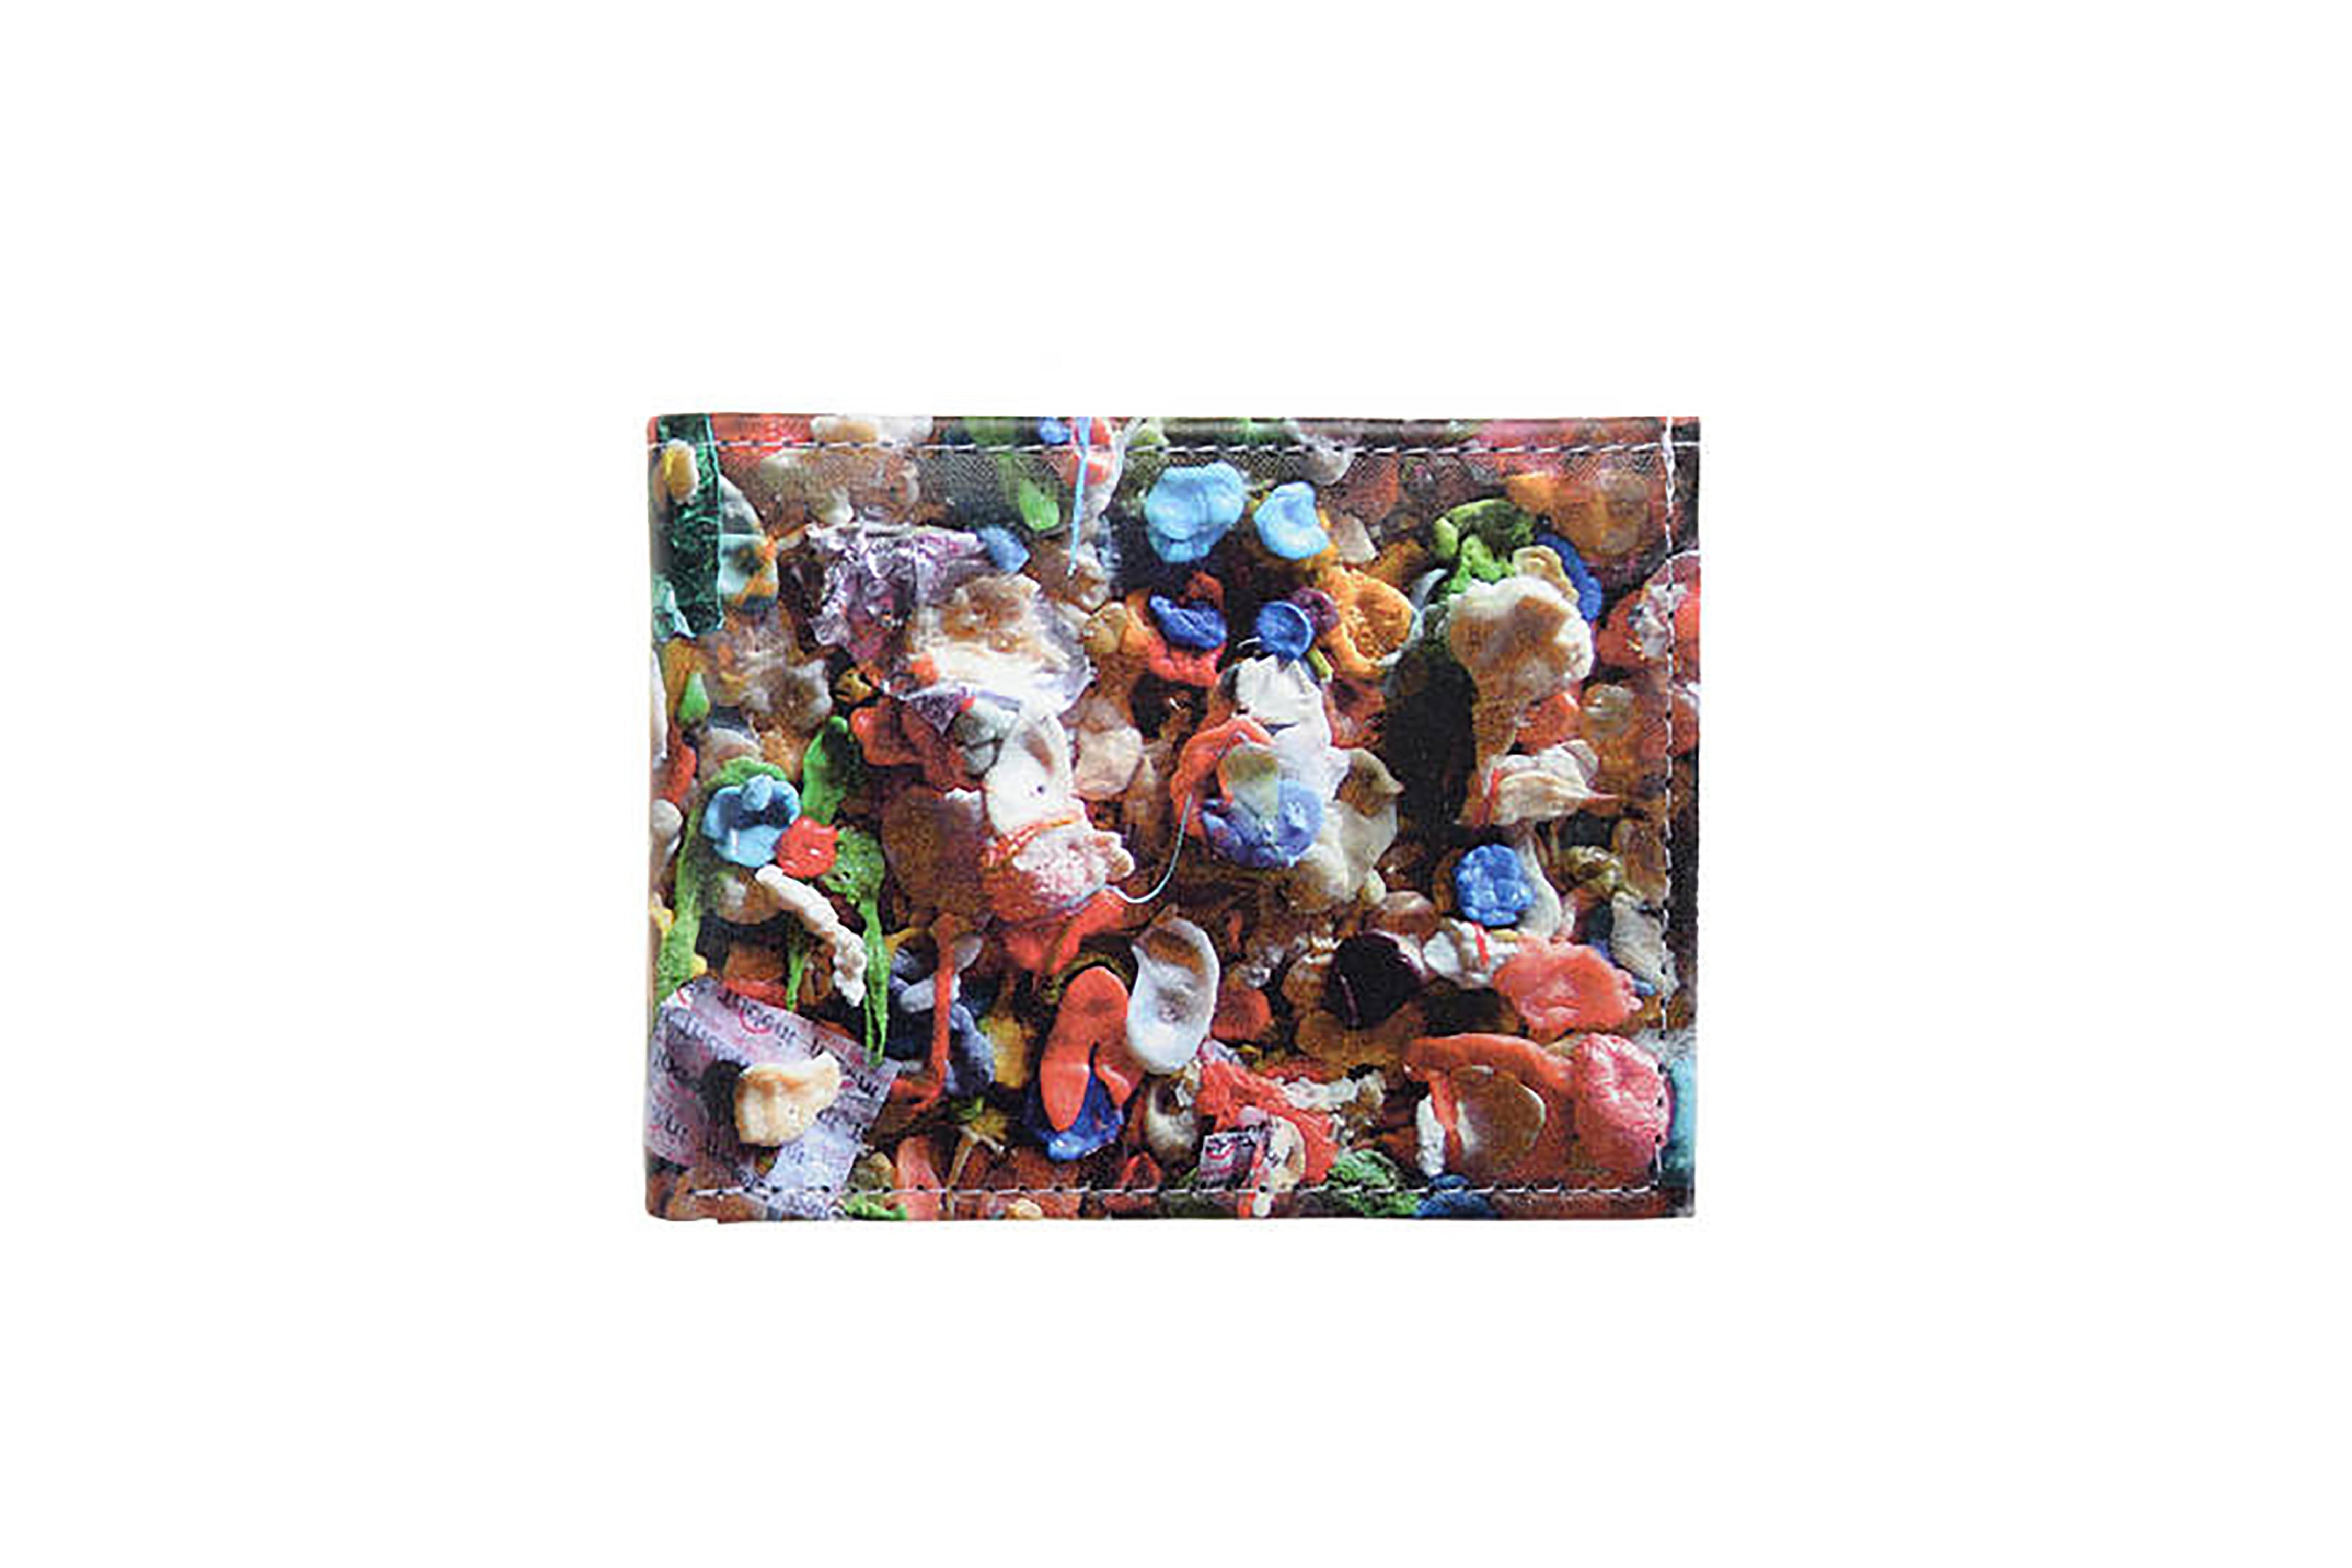 Leather Wallets - Gum Wall - Photography